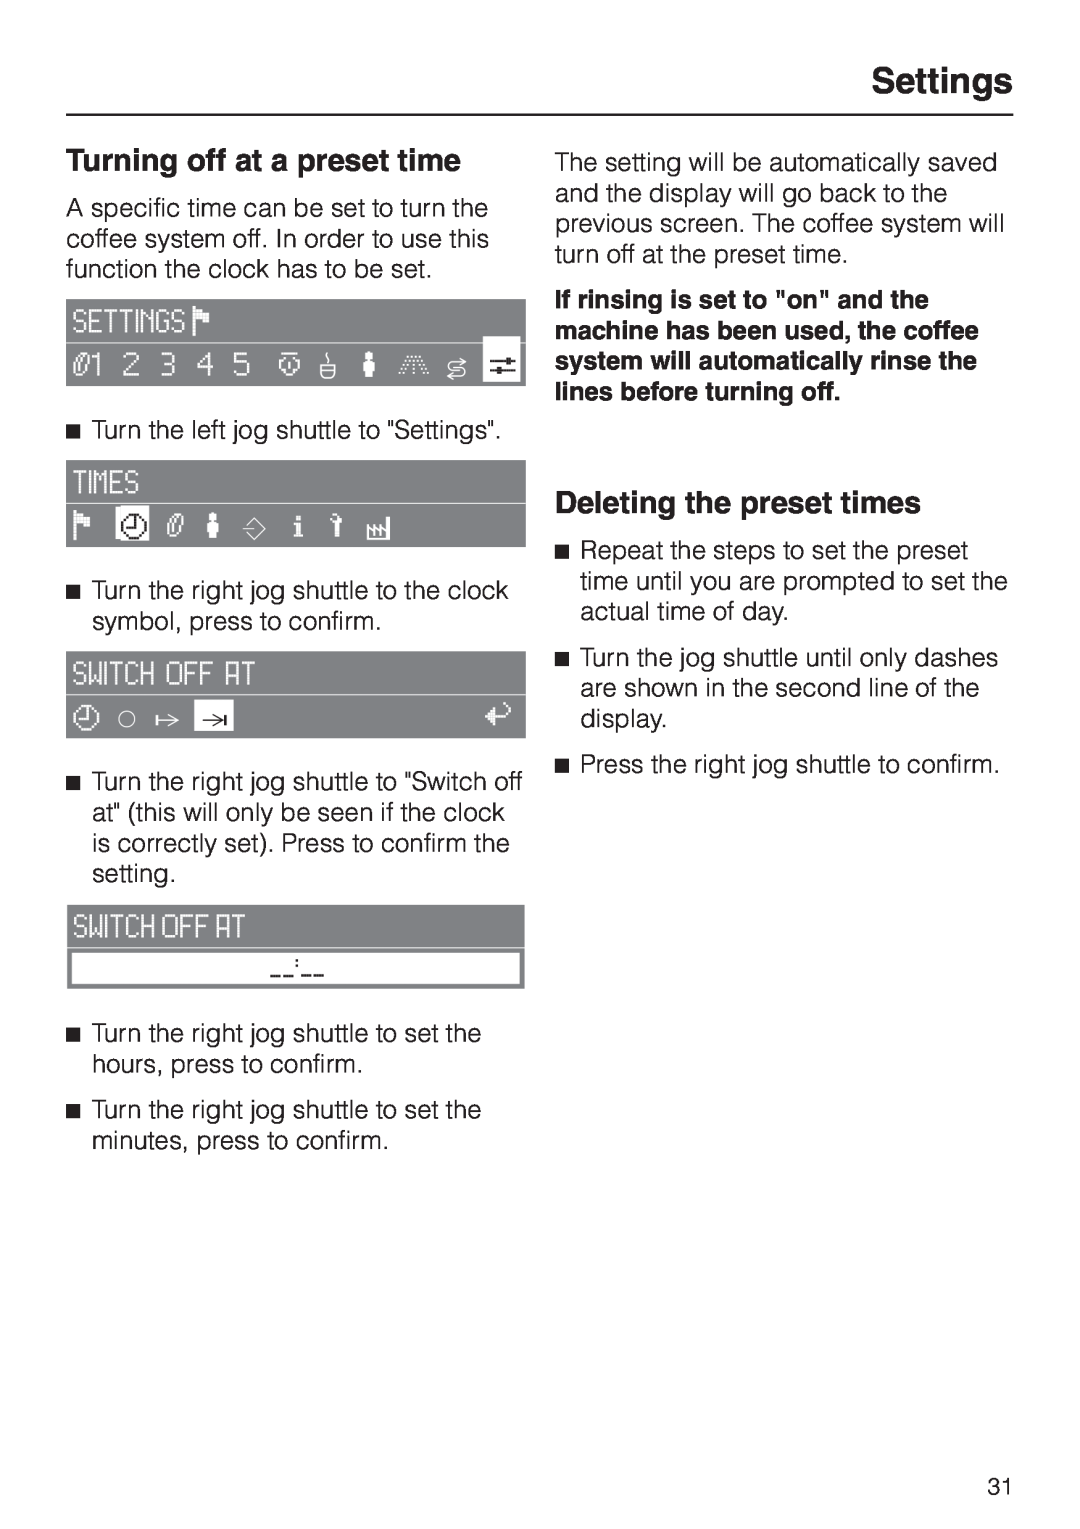 Miele CVA 2660 installation instructions Turning off at a preset time, Deleting the preset times, Settings 